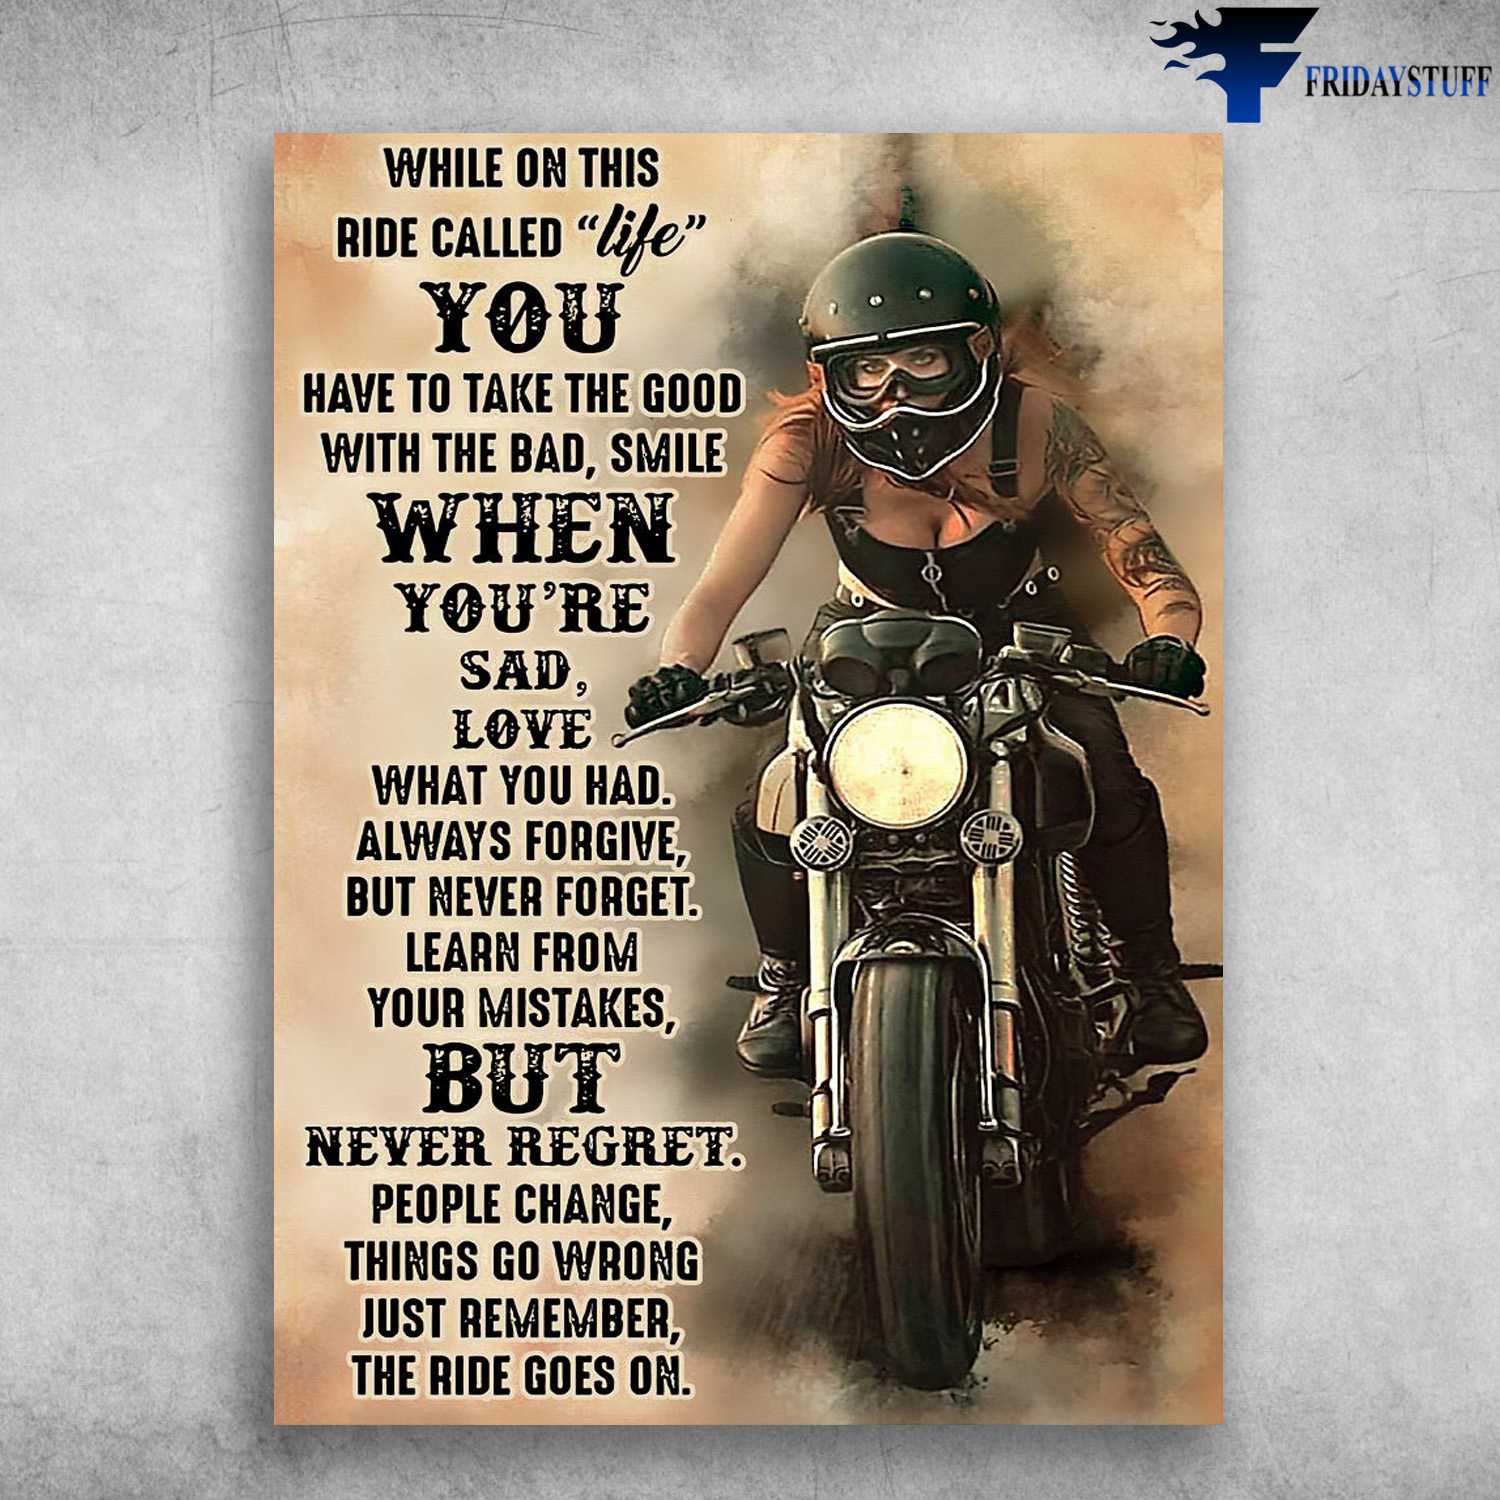 Motocycle Poster, Lady Girl Cycling, While On This Ride Called Life, You Have To Take The Good, With The Bad, Smile When You're Sad, Love What You've Got, And Remember What You Had